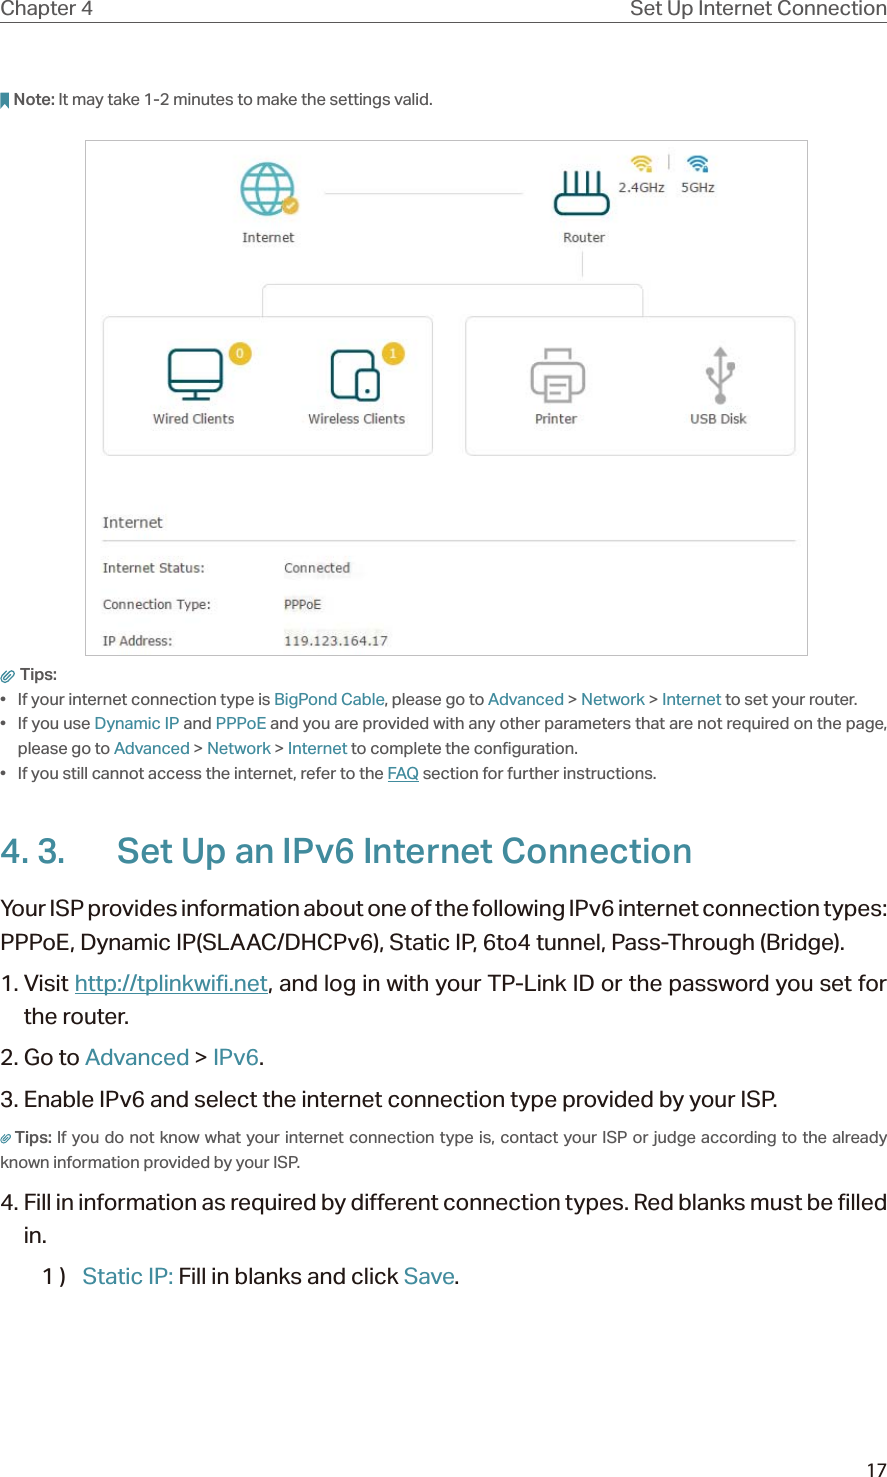 17Chapter 4 Set Up Internet ConnectionNote: It may take 1-2 minutes to make the settings valid. Tips: •  If your internet connection type is BigPond Cable, please go to Advanced &gt; Network &gt; Internet to set your router.• If you use Dynamic IP and PPPoE and you are provided with any other parameters that are not required on the page, please go to Advanced &gt; Network &gt; Internet to complete the configuration.•  If you still cannot access the internet, refer to the FAQ section for further instructions.4. 3.  Set Up an IPv6 Internet ConnectionYour ISP provides information about one of the following IPv6 internet connection types: PPPoE, Dynamic IP(SLAAC/DHCPv6), Static IP, 6to4 tunnel, Pass-Through (Bridge).1. Visit http://tplinkwifi.net, and log in with your TP-Link ID or the password you set for the router.2. Go to Advanced &gt; IPv6. 3. Enable IPv6 and select the internet connection type provided by your ISP.Tips: If you do not know what your internet connection type is, contact your ISP or judge according to the already known information provided by your ISP.4. Fill in information as required by different connection types. Red blanks must be filled in.1 )  Static IP: Fill in blanks and click Save.